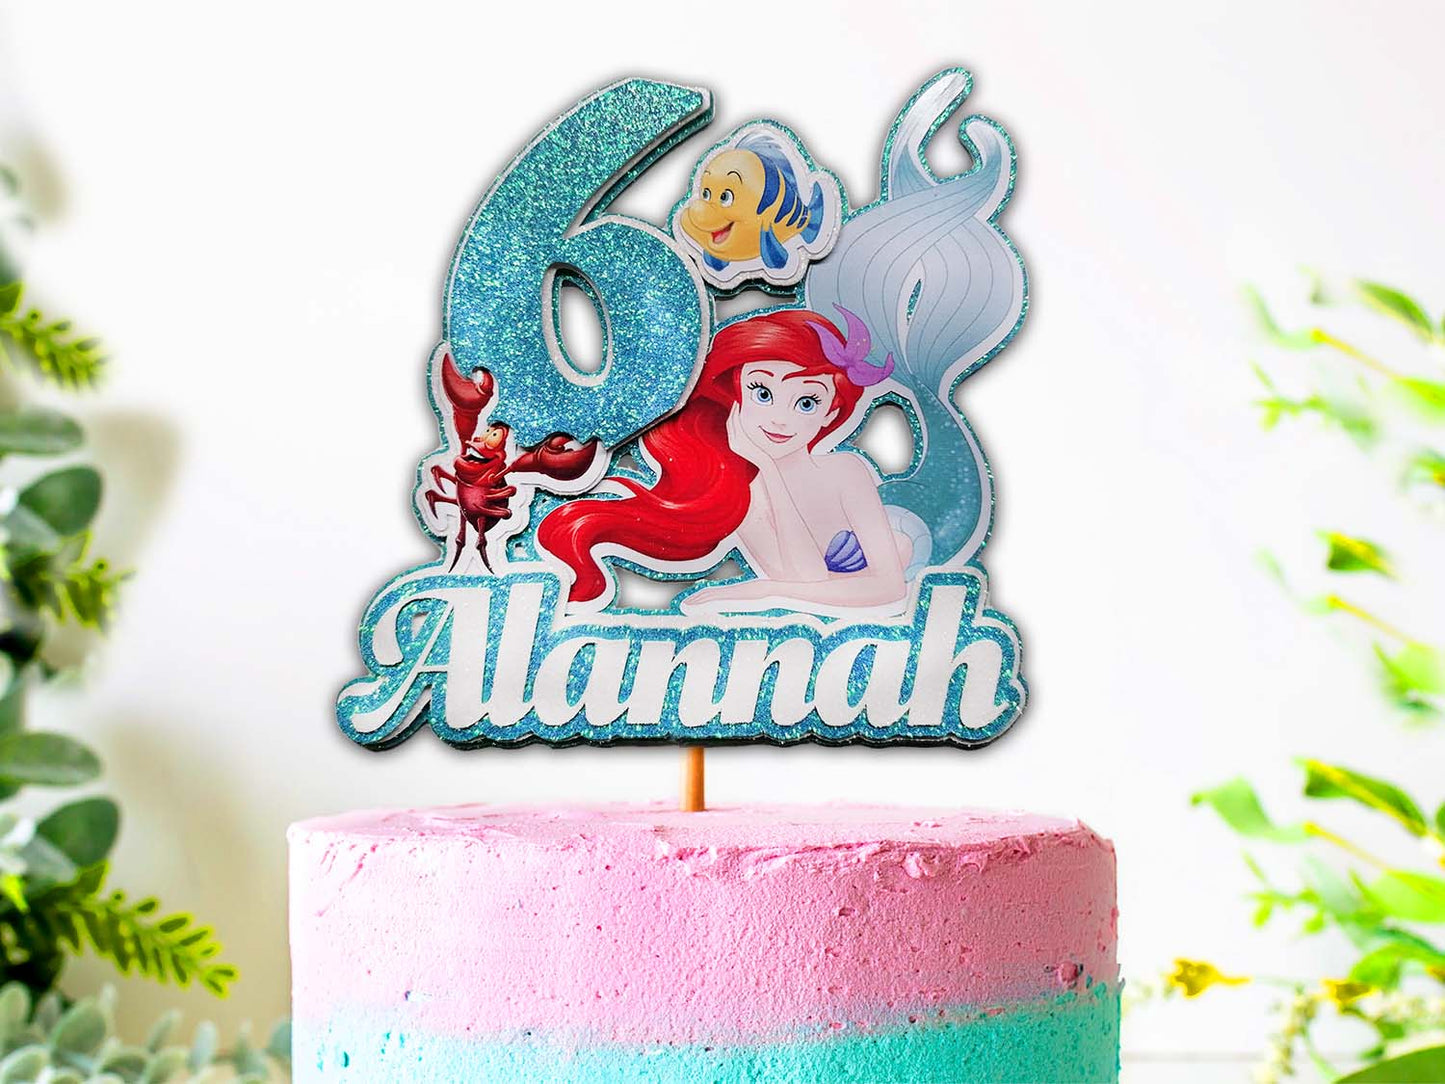 Little Mermaid PRINCESS ARIEL Themed Birthday Cake Topper Set Featuring  Ariel Figure and Decorative Themed Accessories by Cake Toppers - Shop  Online for Kitchen in New Zealand